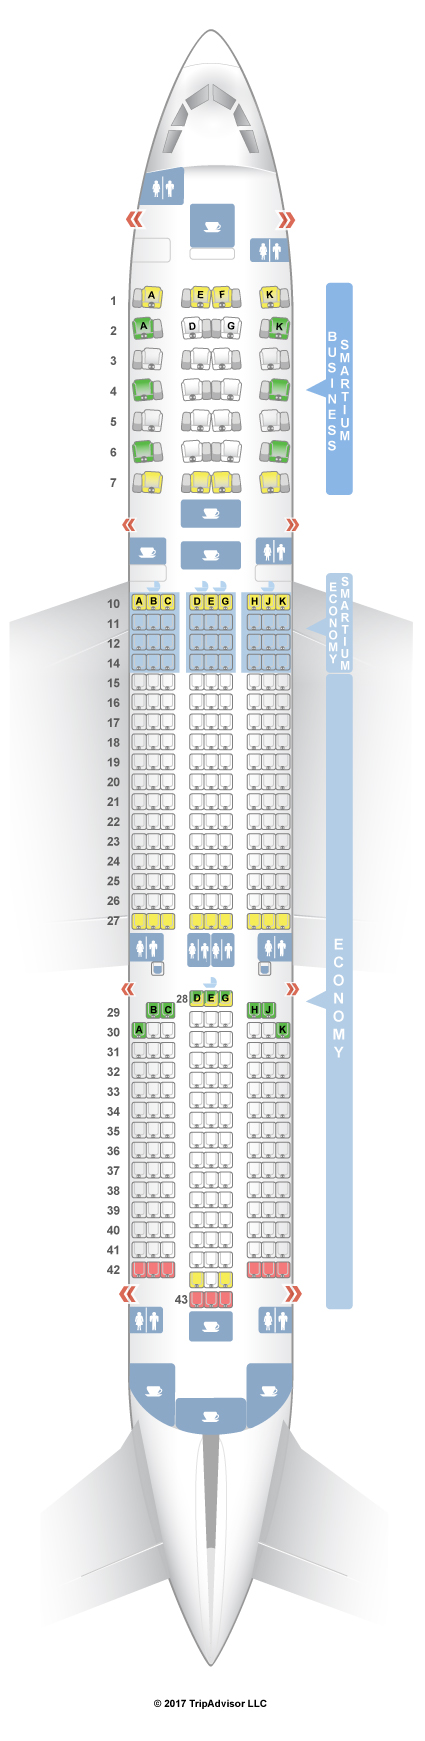 Asiana Airlines Seating Chart